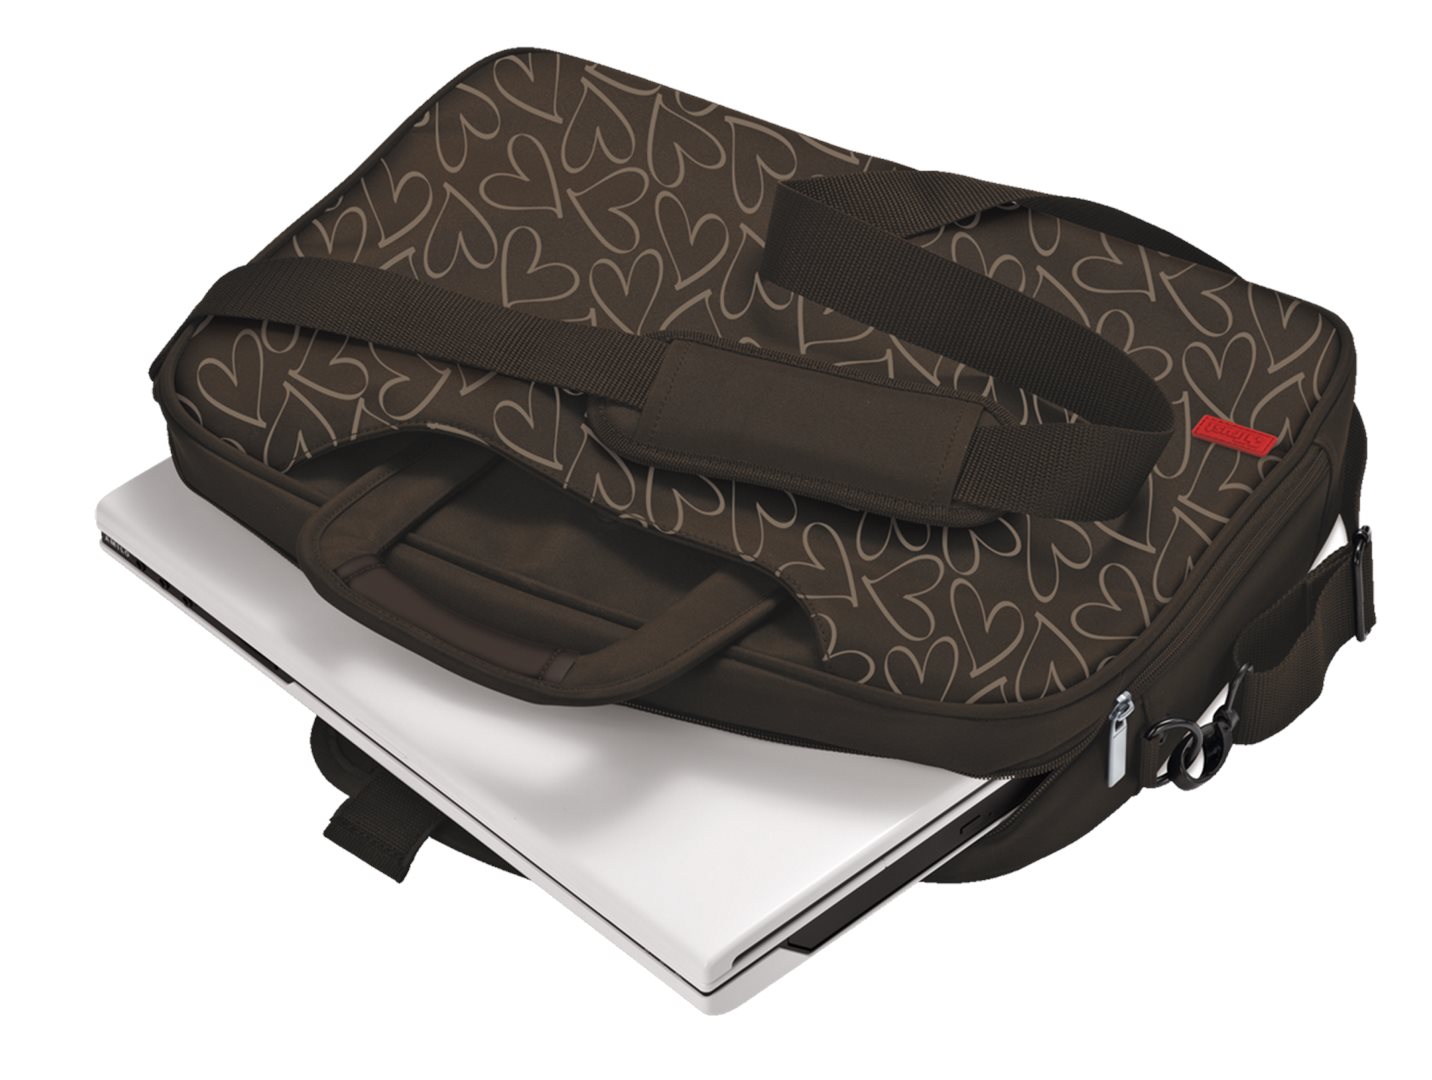 Trust Oslo Carry Bag for 15.6" laptops - brown